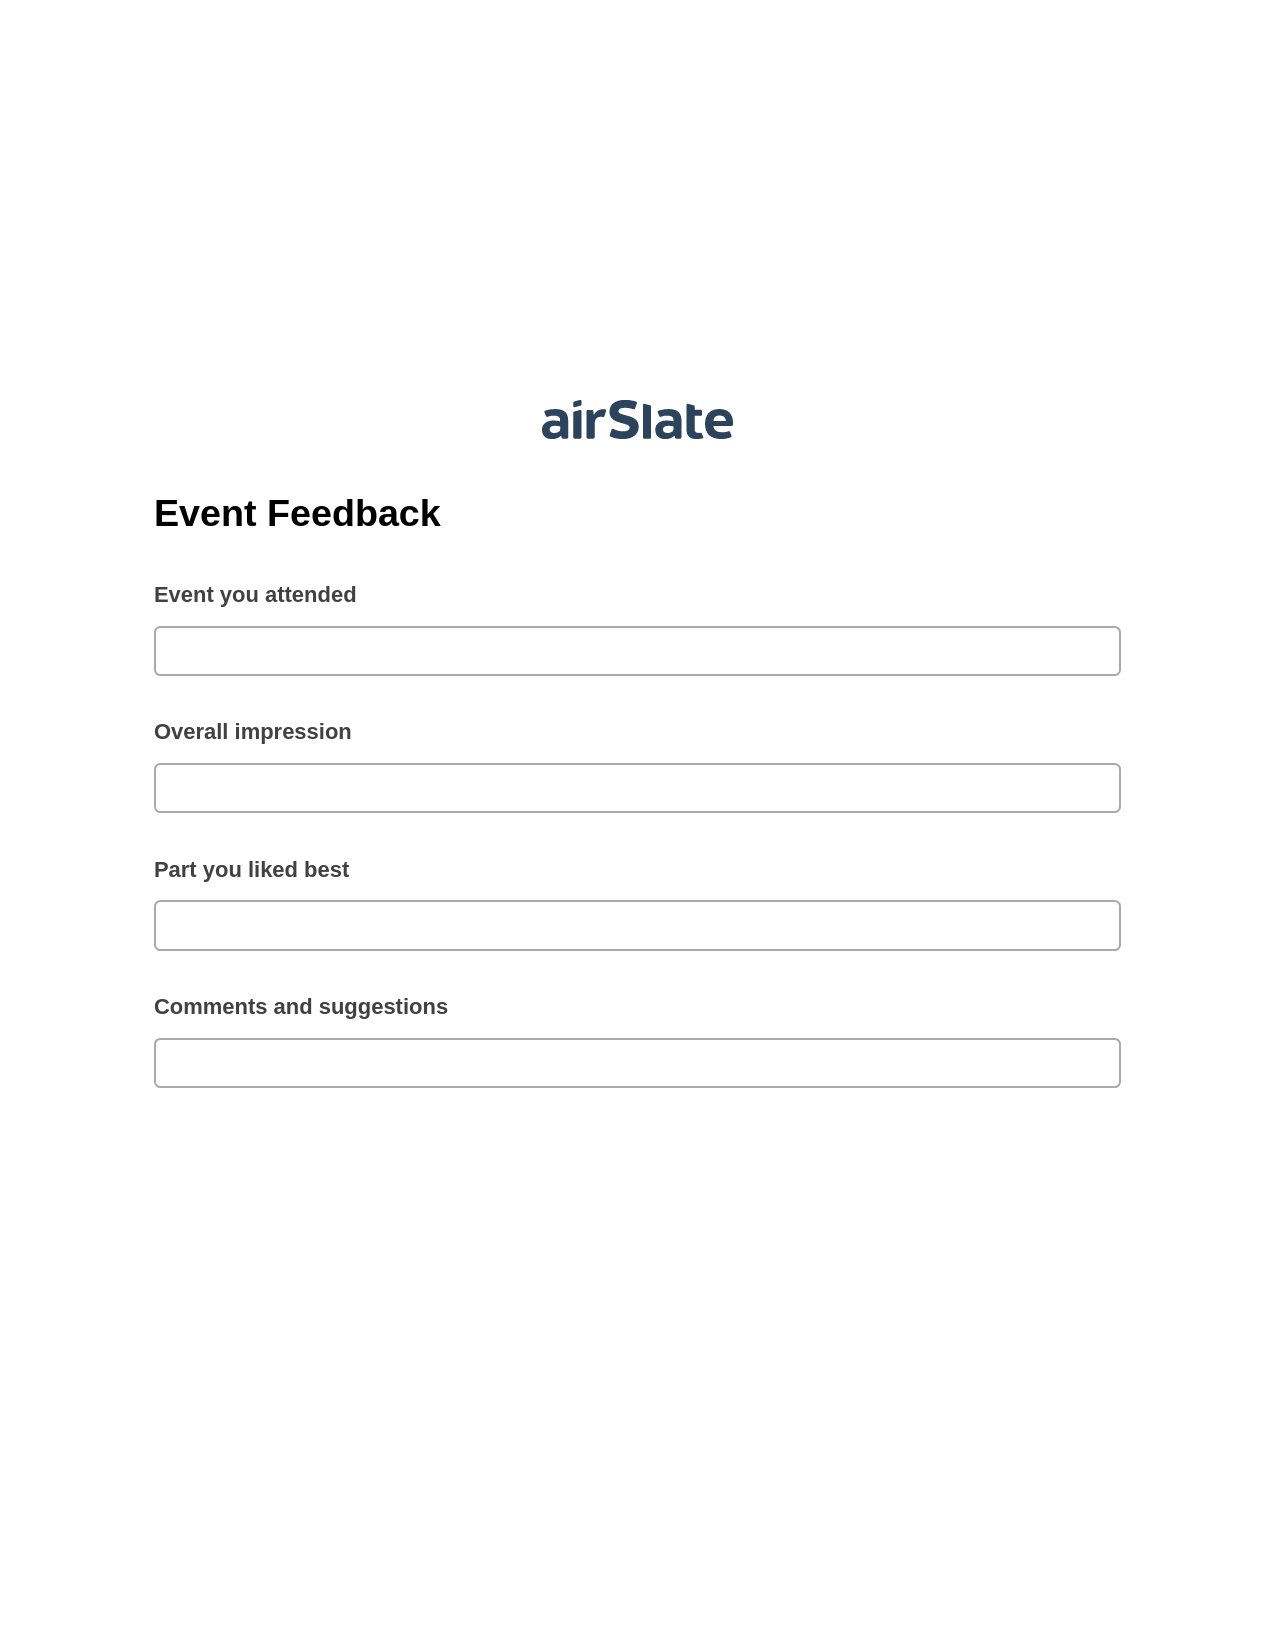 Event Feedback Pre-fill from another Slate Bot, Lock the slate bot, Webhook Postfinish Bot